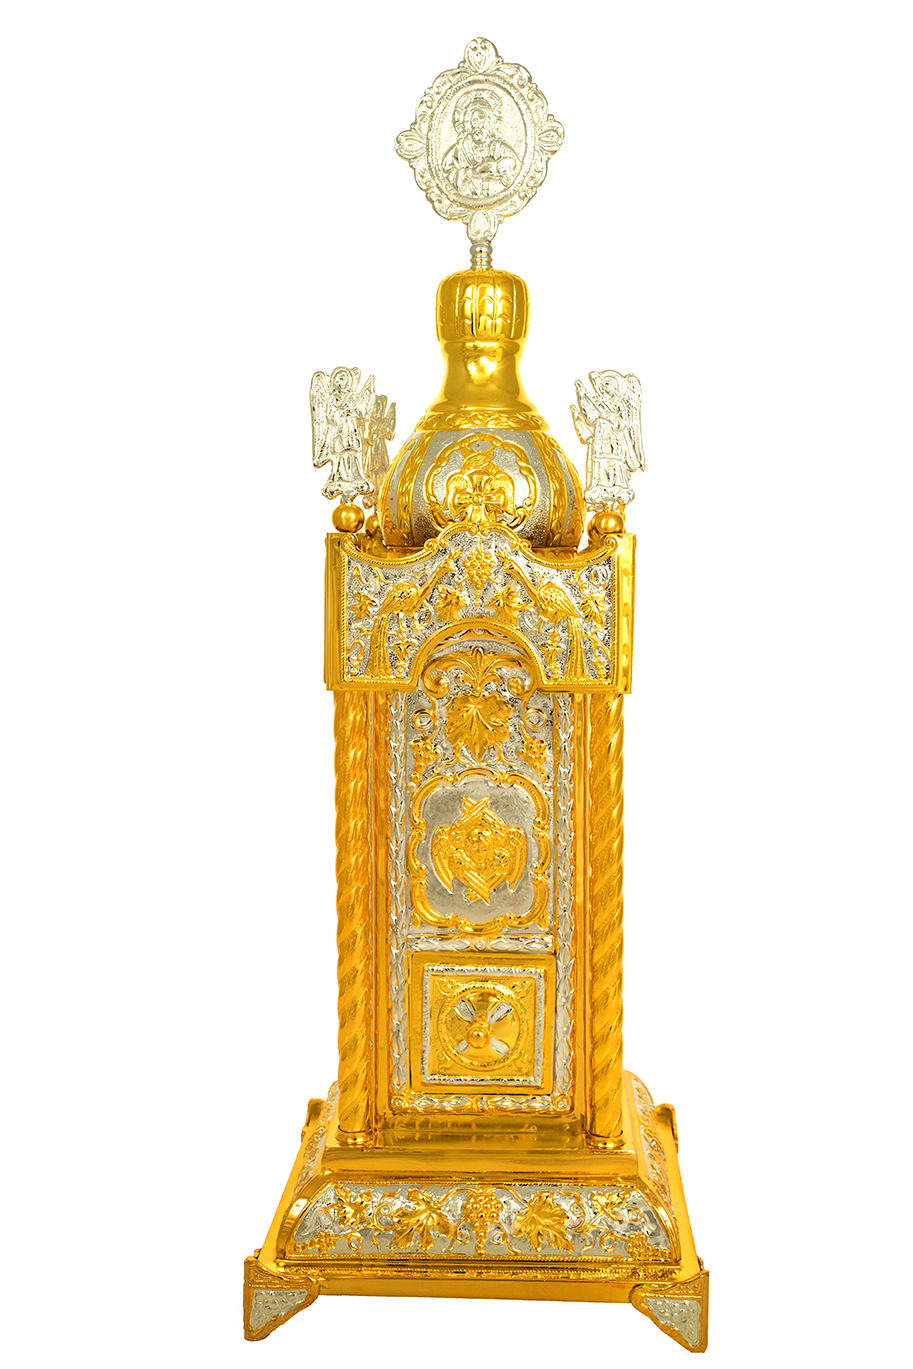 Holy Table Orthodox Tabernacle Rectanqular with Colums Metal Decorations Gold and Silver Plated